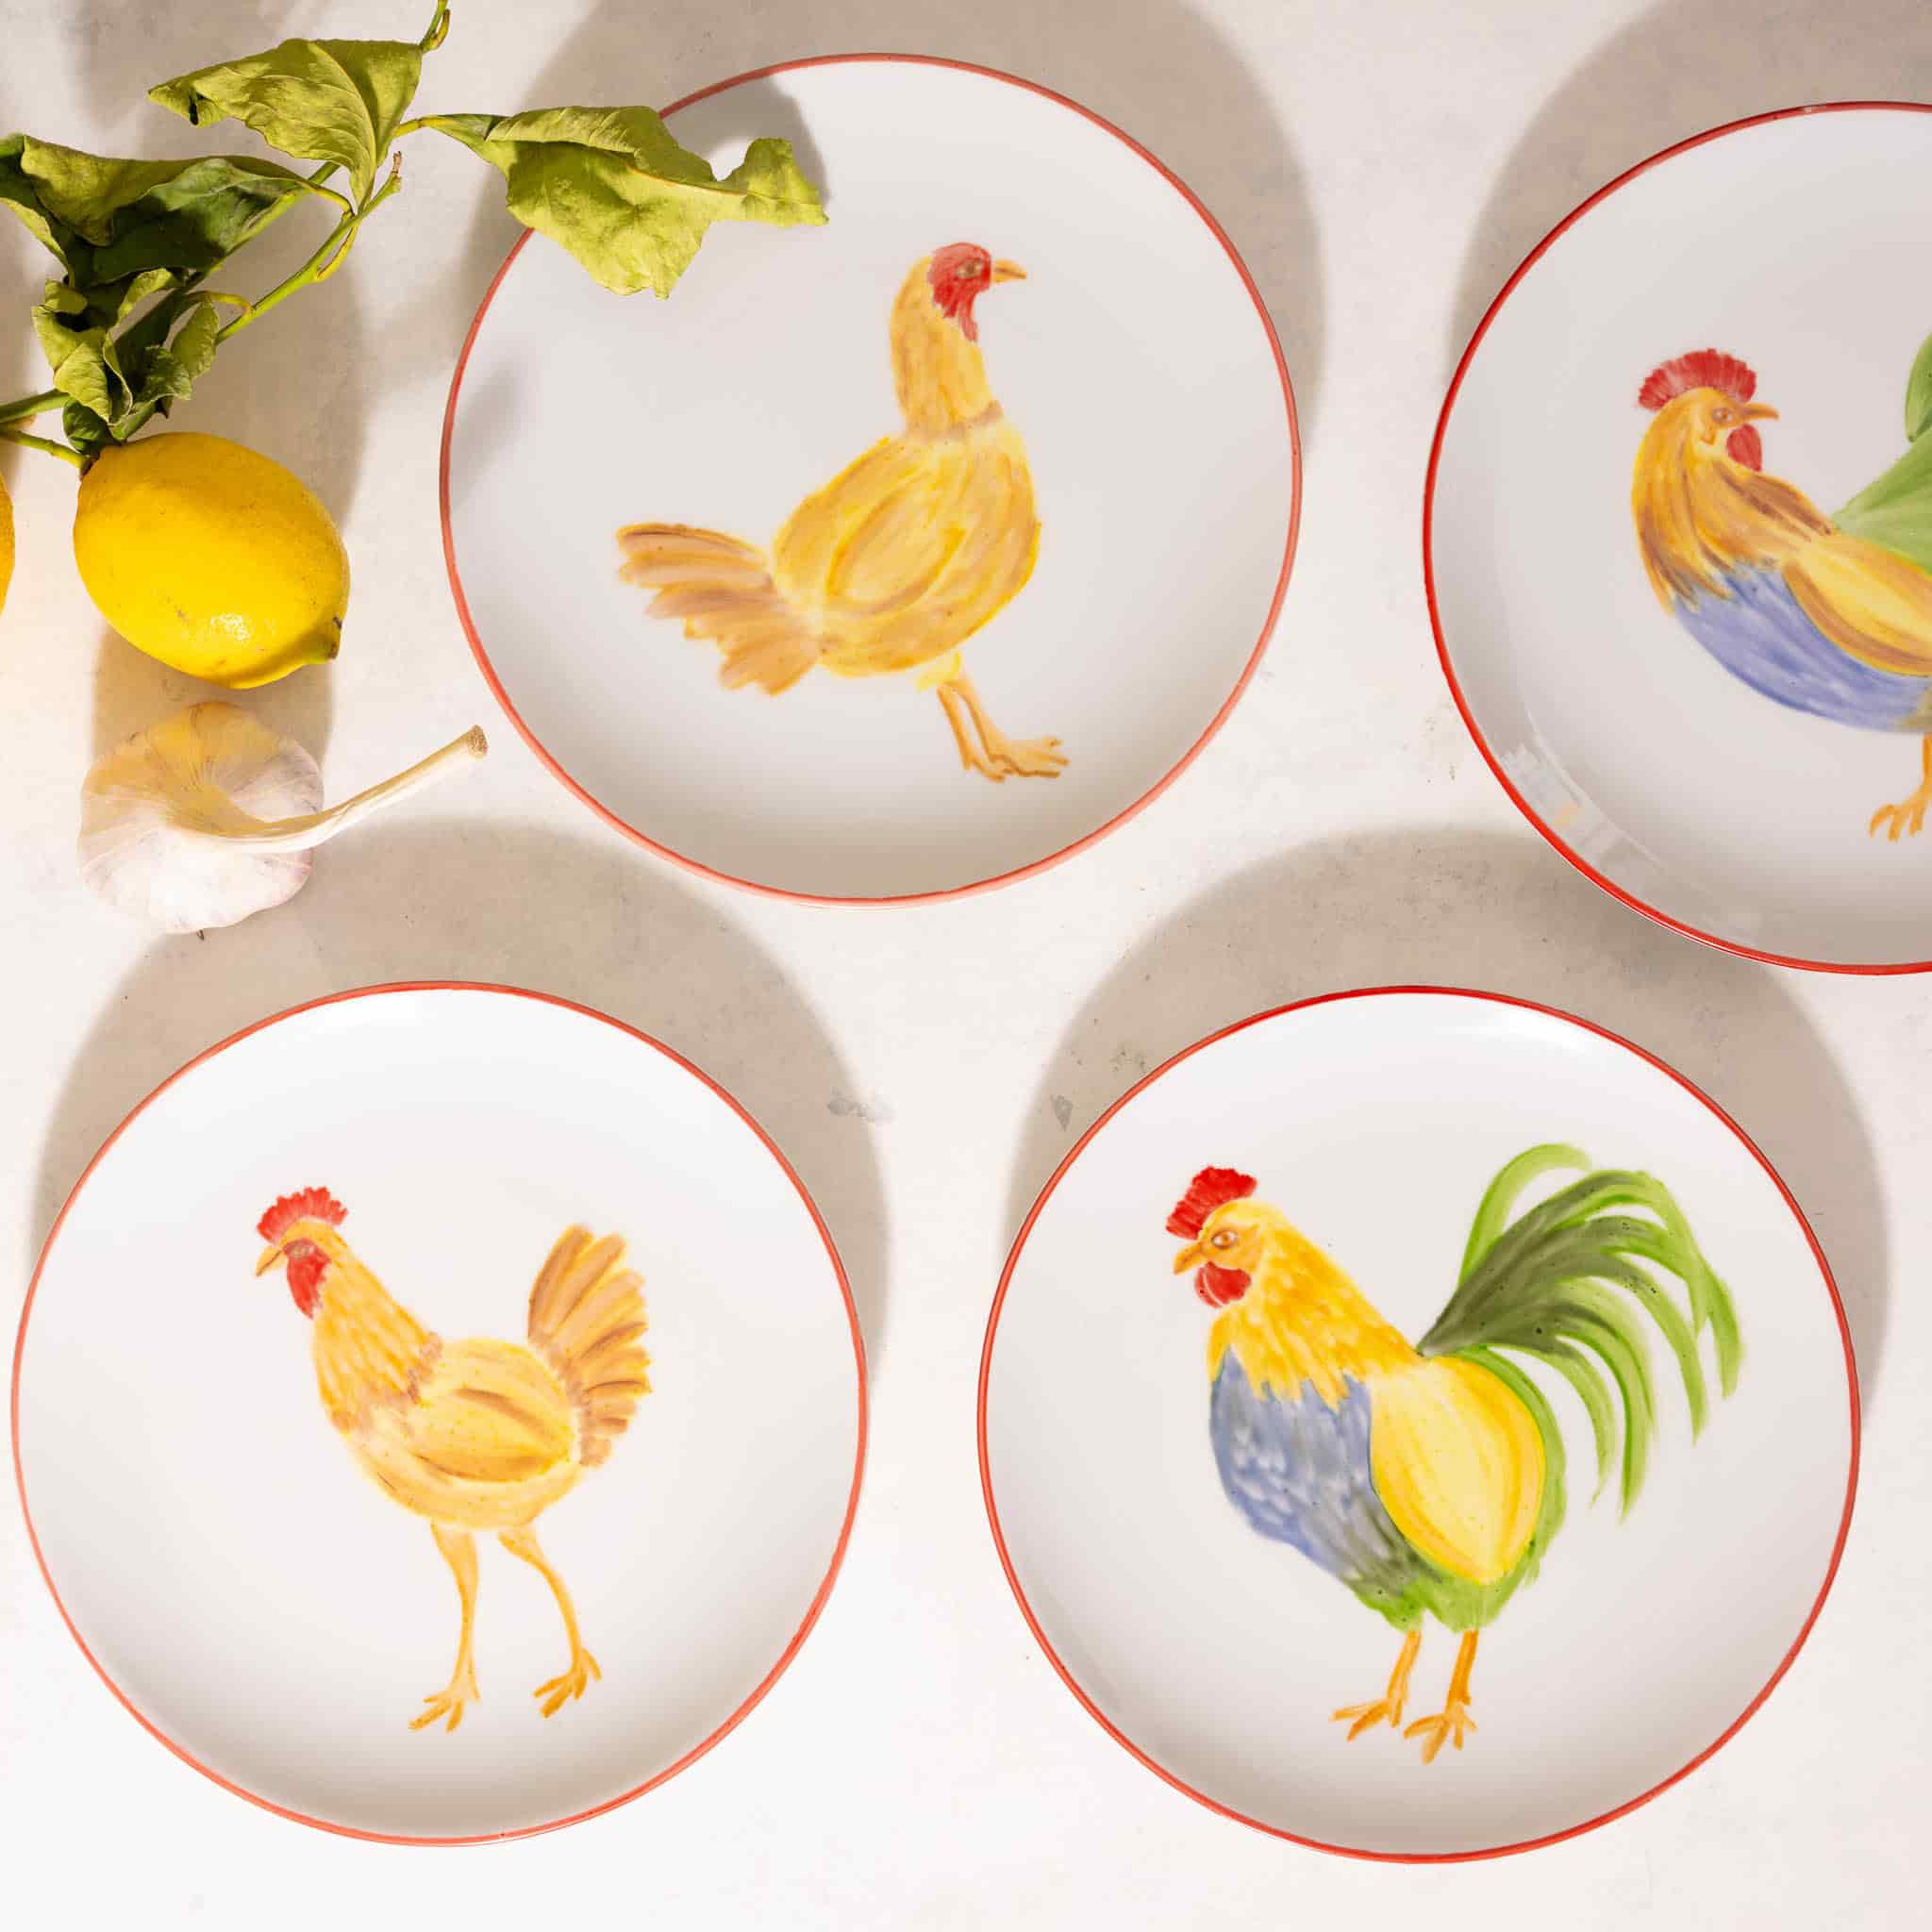 The Platera Lola Chicken Porcelain Side Plate, 21cm